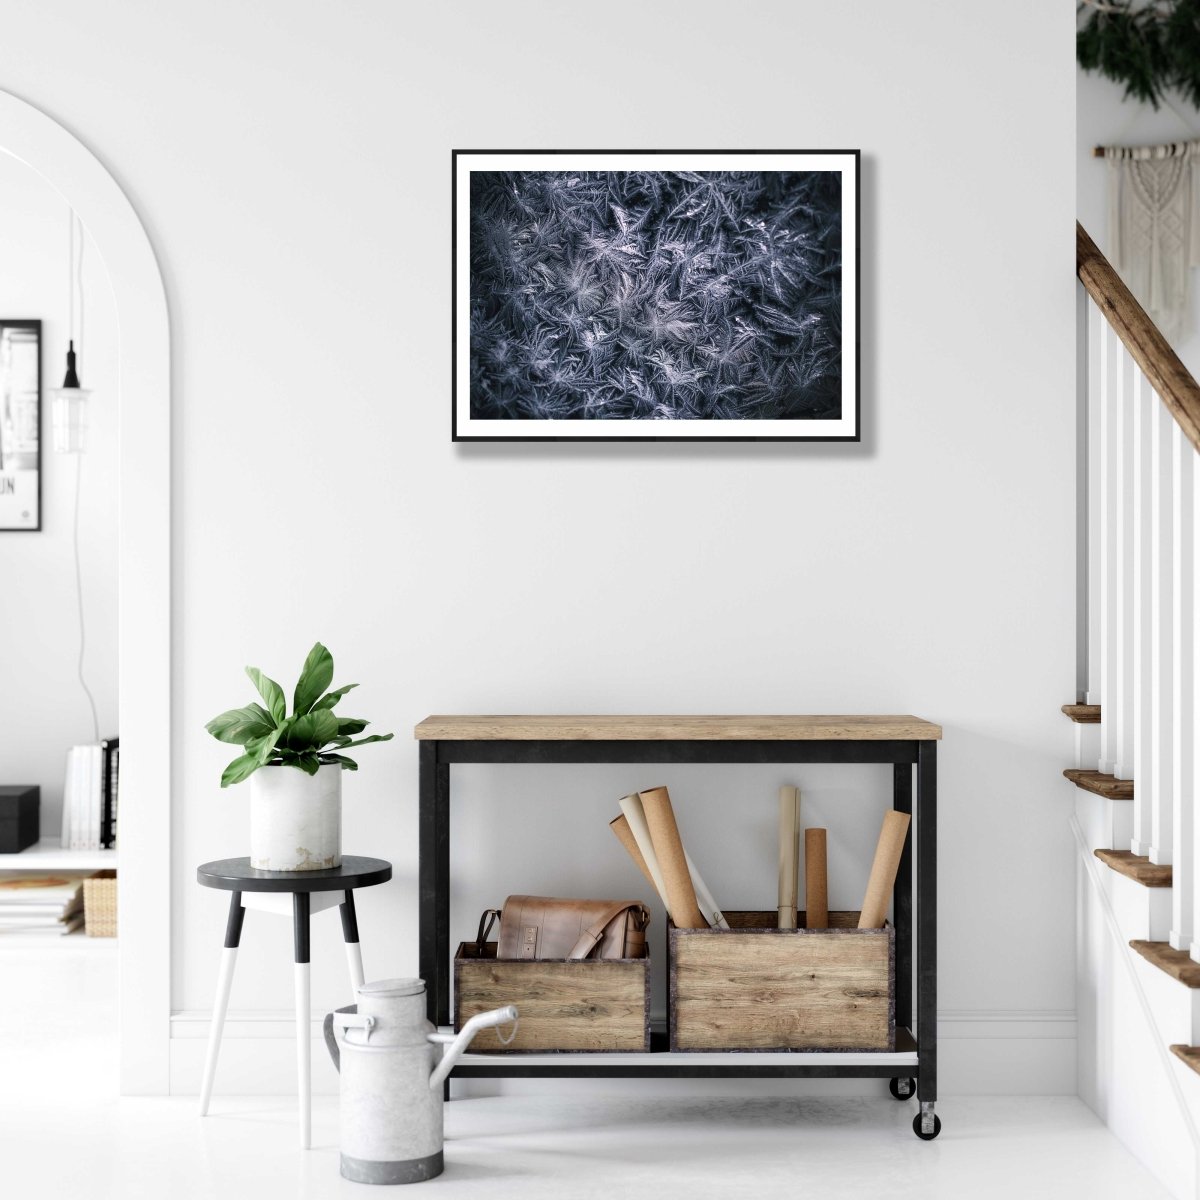 Framed close-up frost flower photo, minimalist white and deep blue palette, white living room wall.